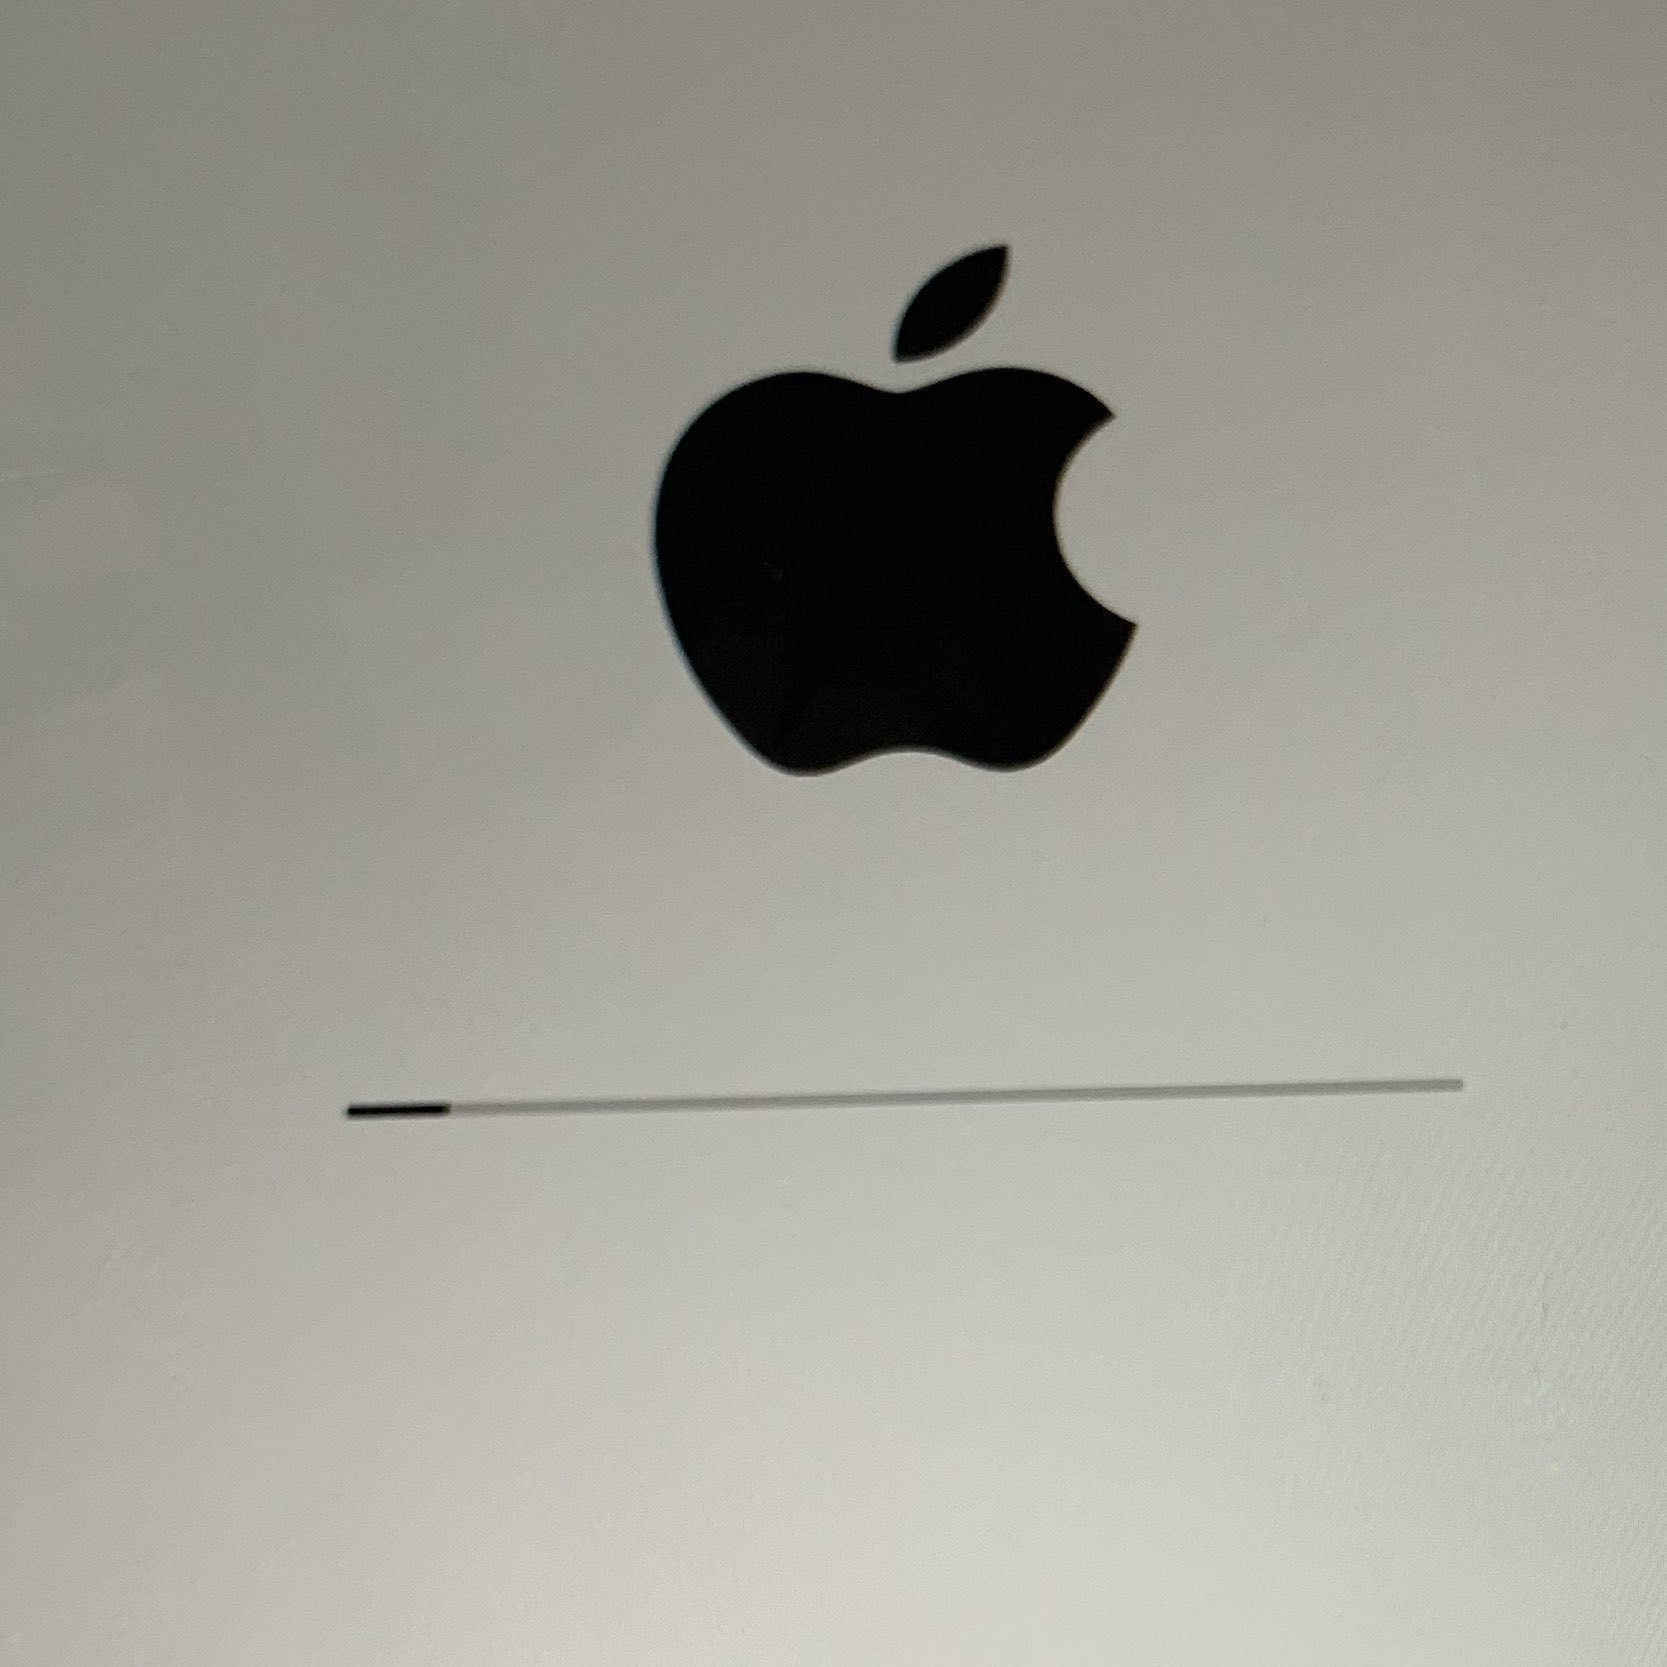 An iPad Air 2, in the process of upgrading to iOS 13.1.1